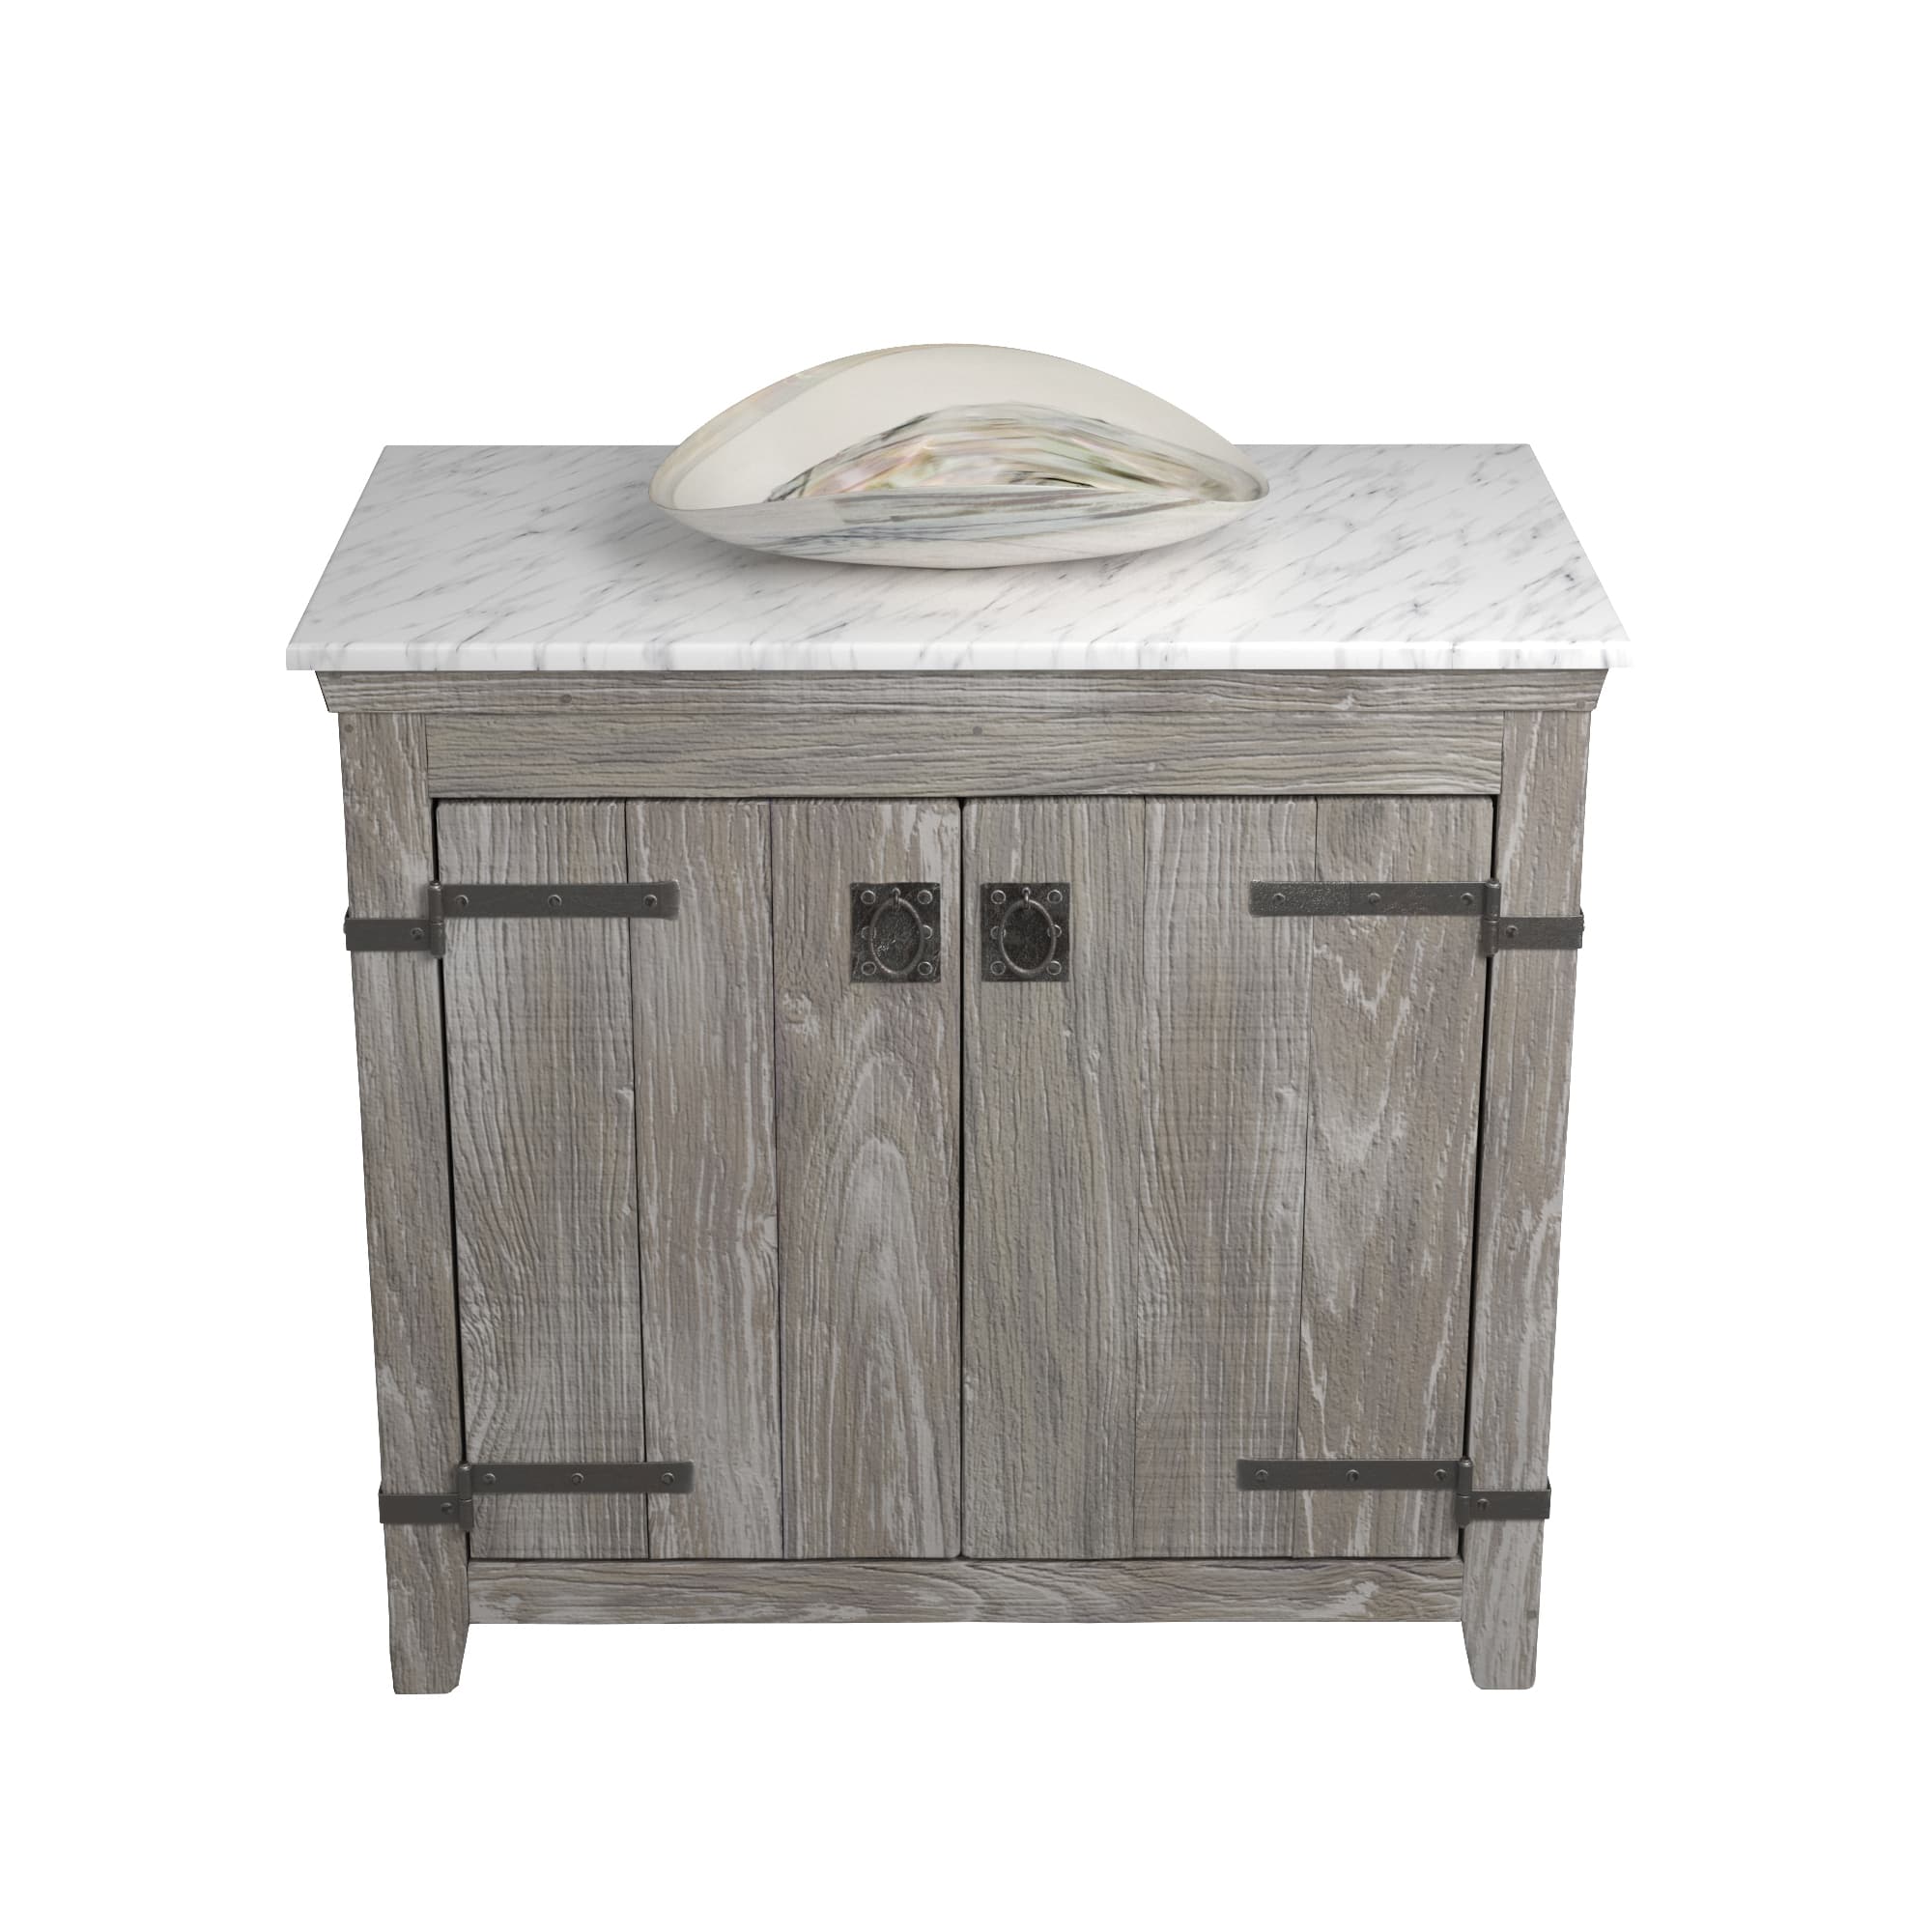 Native Trails 36" Americana Vanity in Driftwood with Carrara Marble Top and Sorrento in Abalone, No Faucet Hole, BND36-VB-CT-MG-096